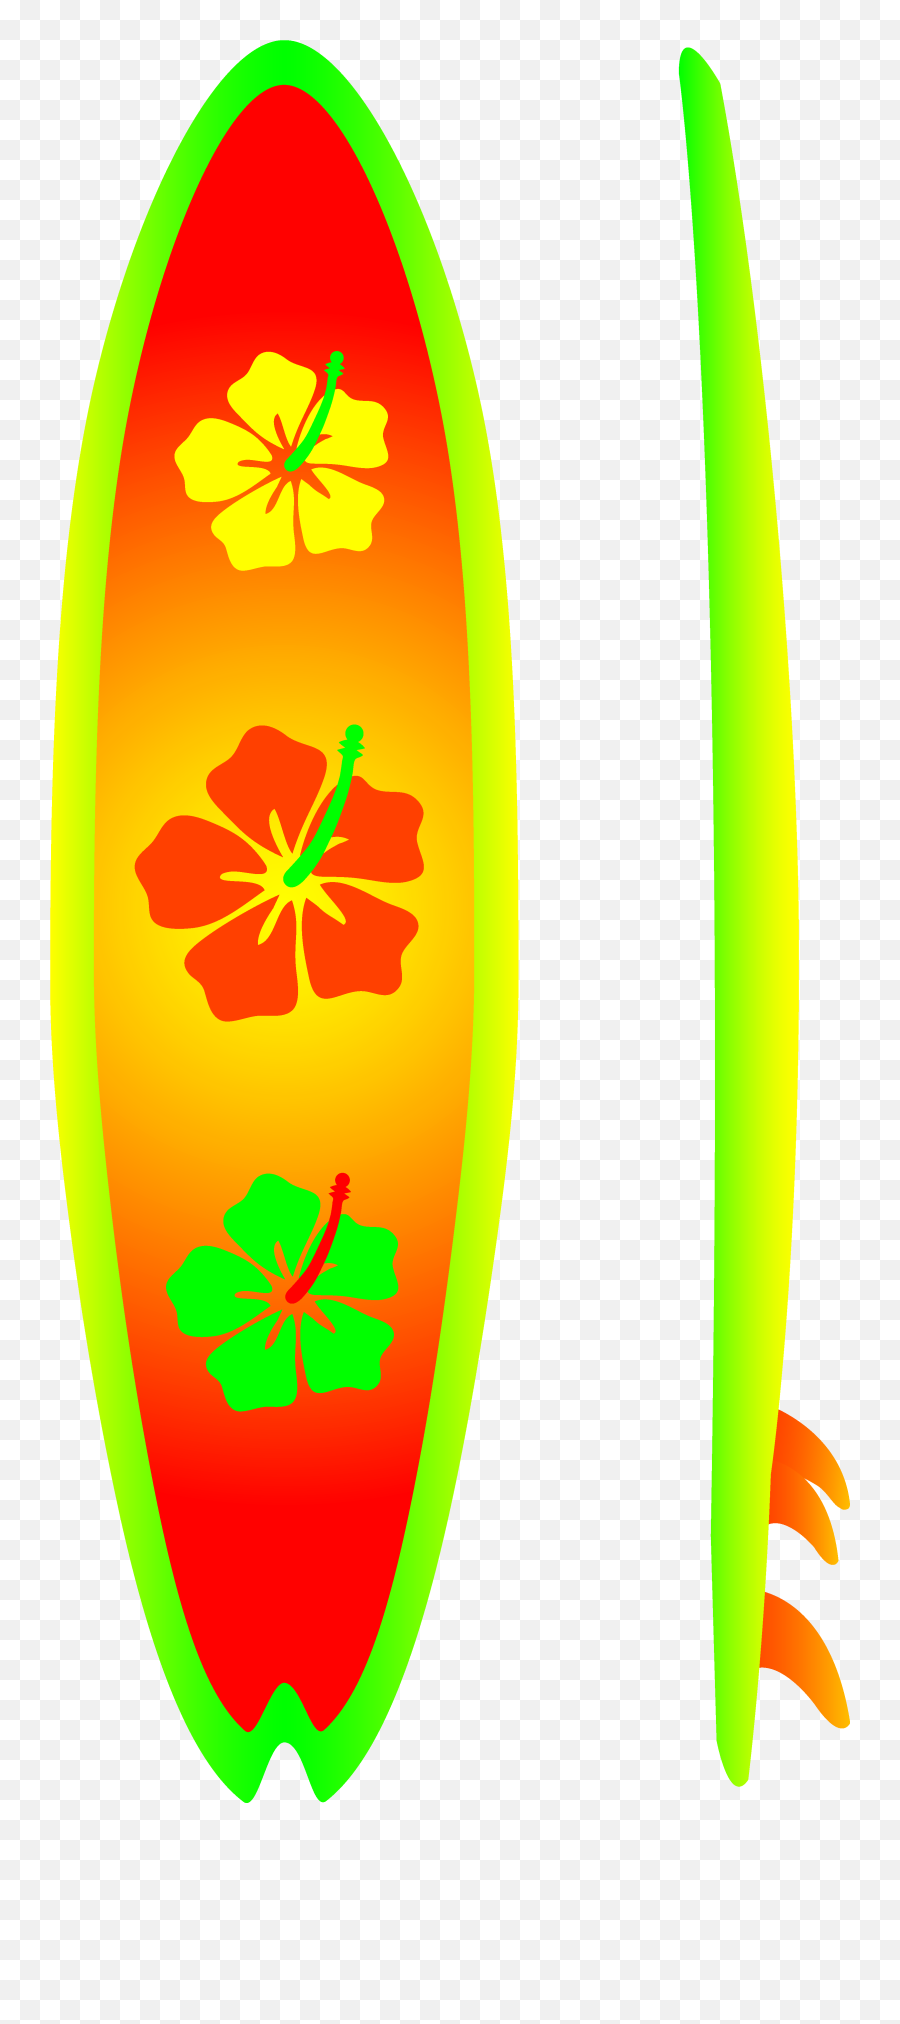 Free Picture Of A Surf Board Download Free Clip Art Free - Surfboard Emoji,Surfboard Emoji